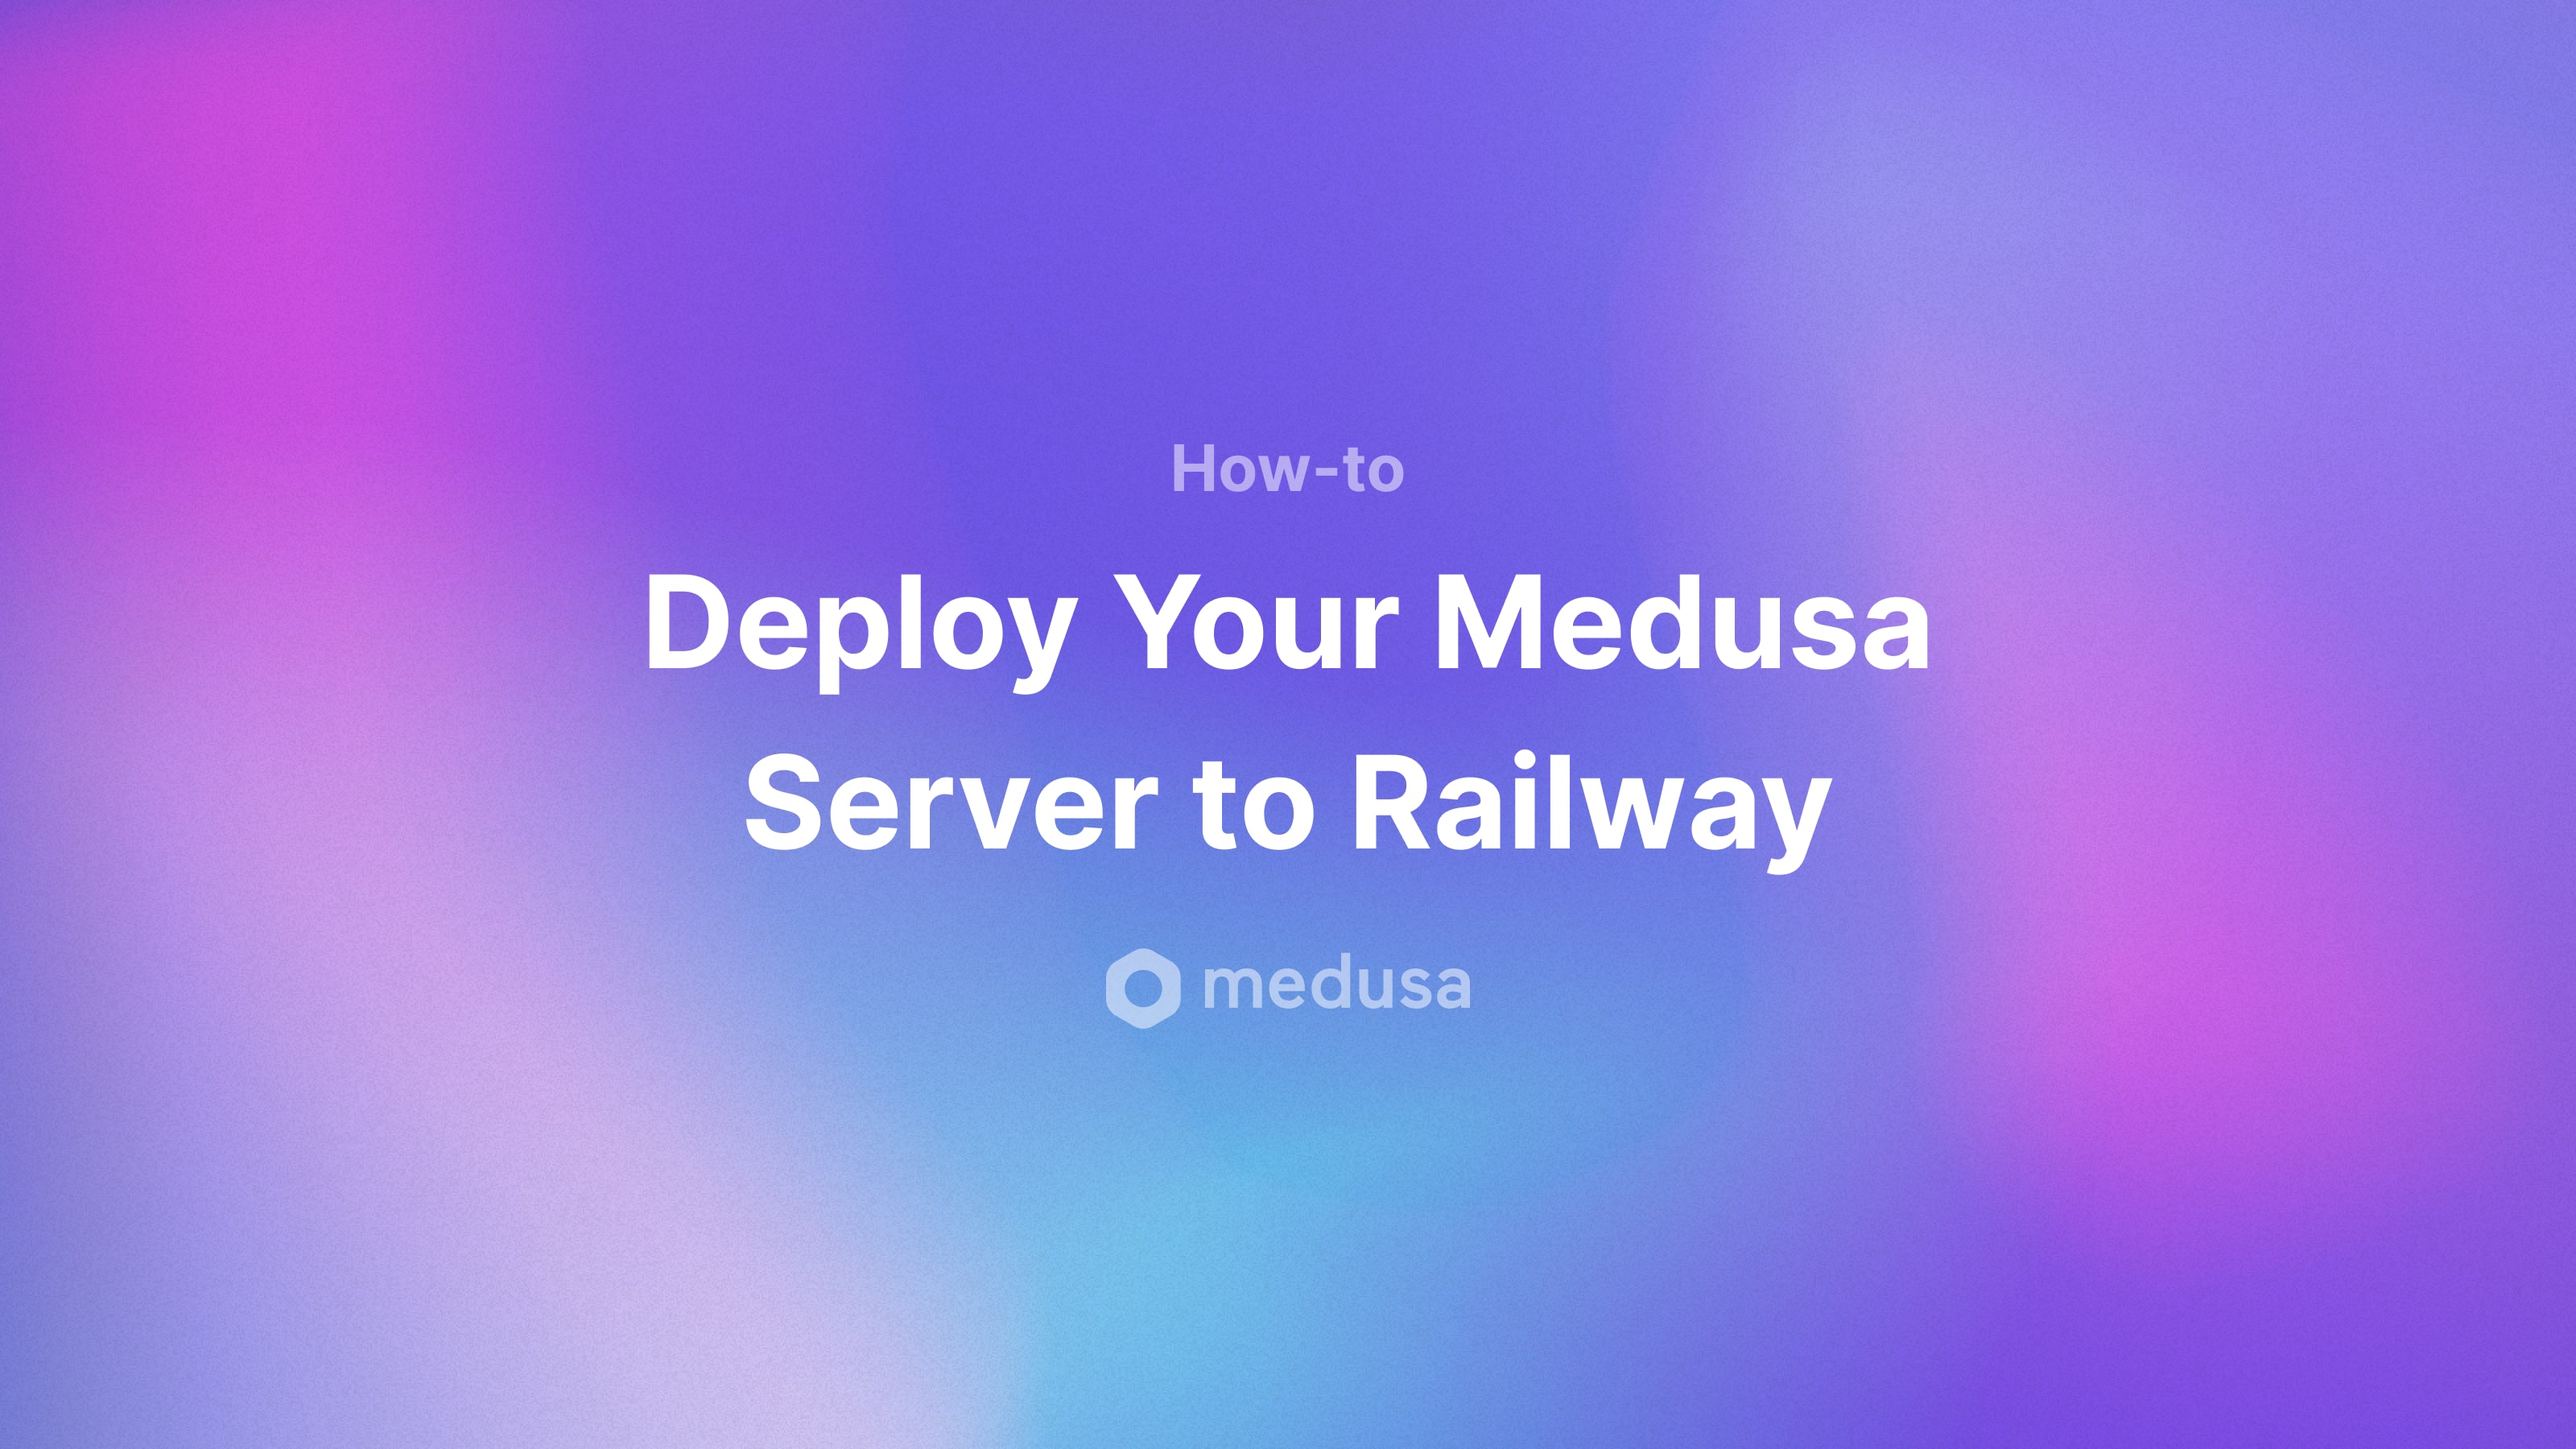 How to Deploy Your Medusa Server to Railway